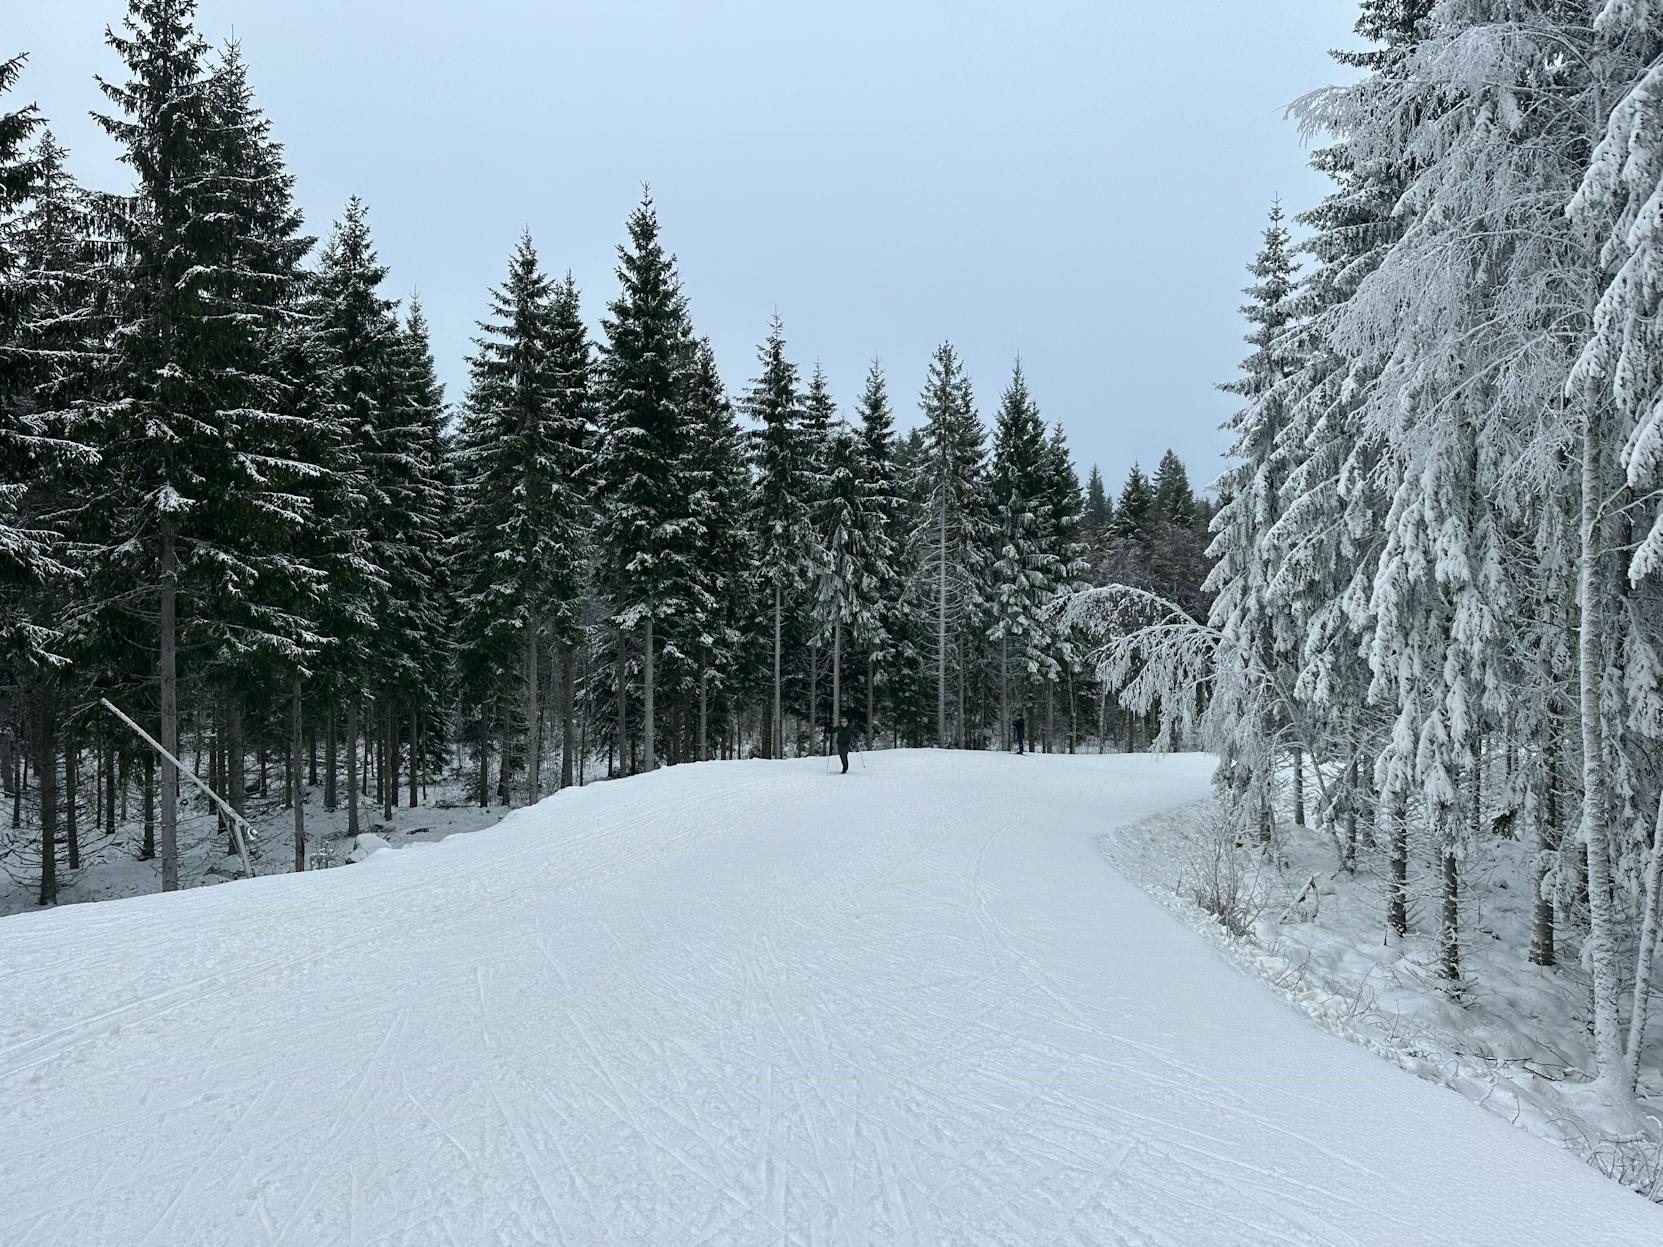 Join Amalie's cross-country skiing holiday in Sweden